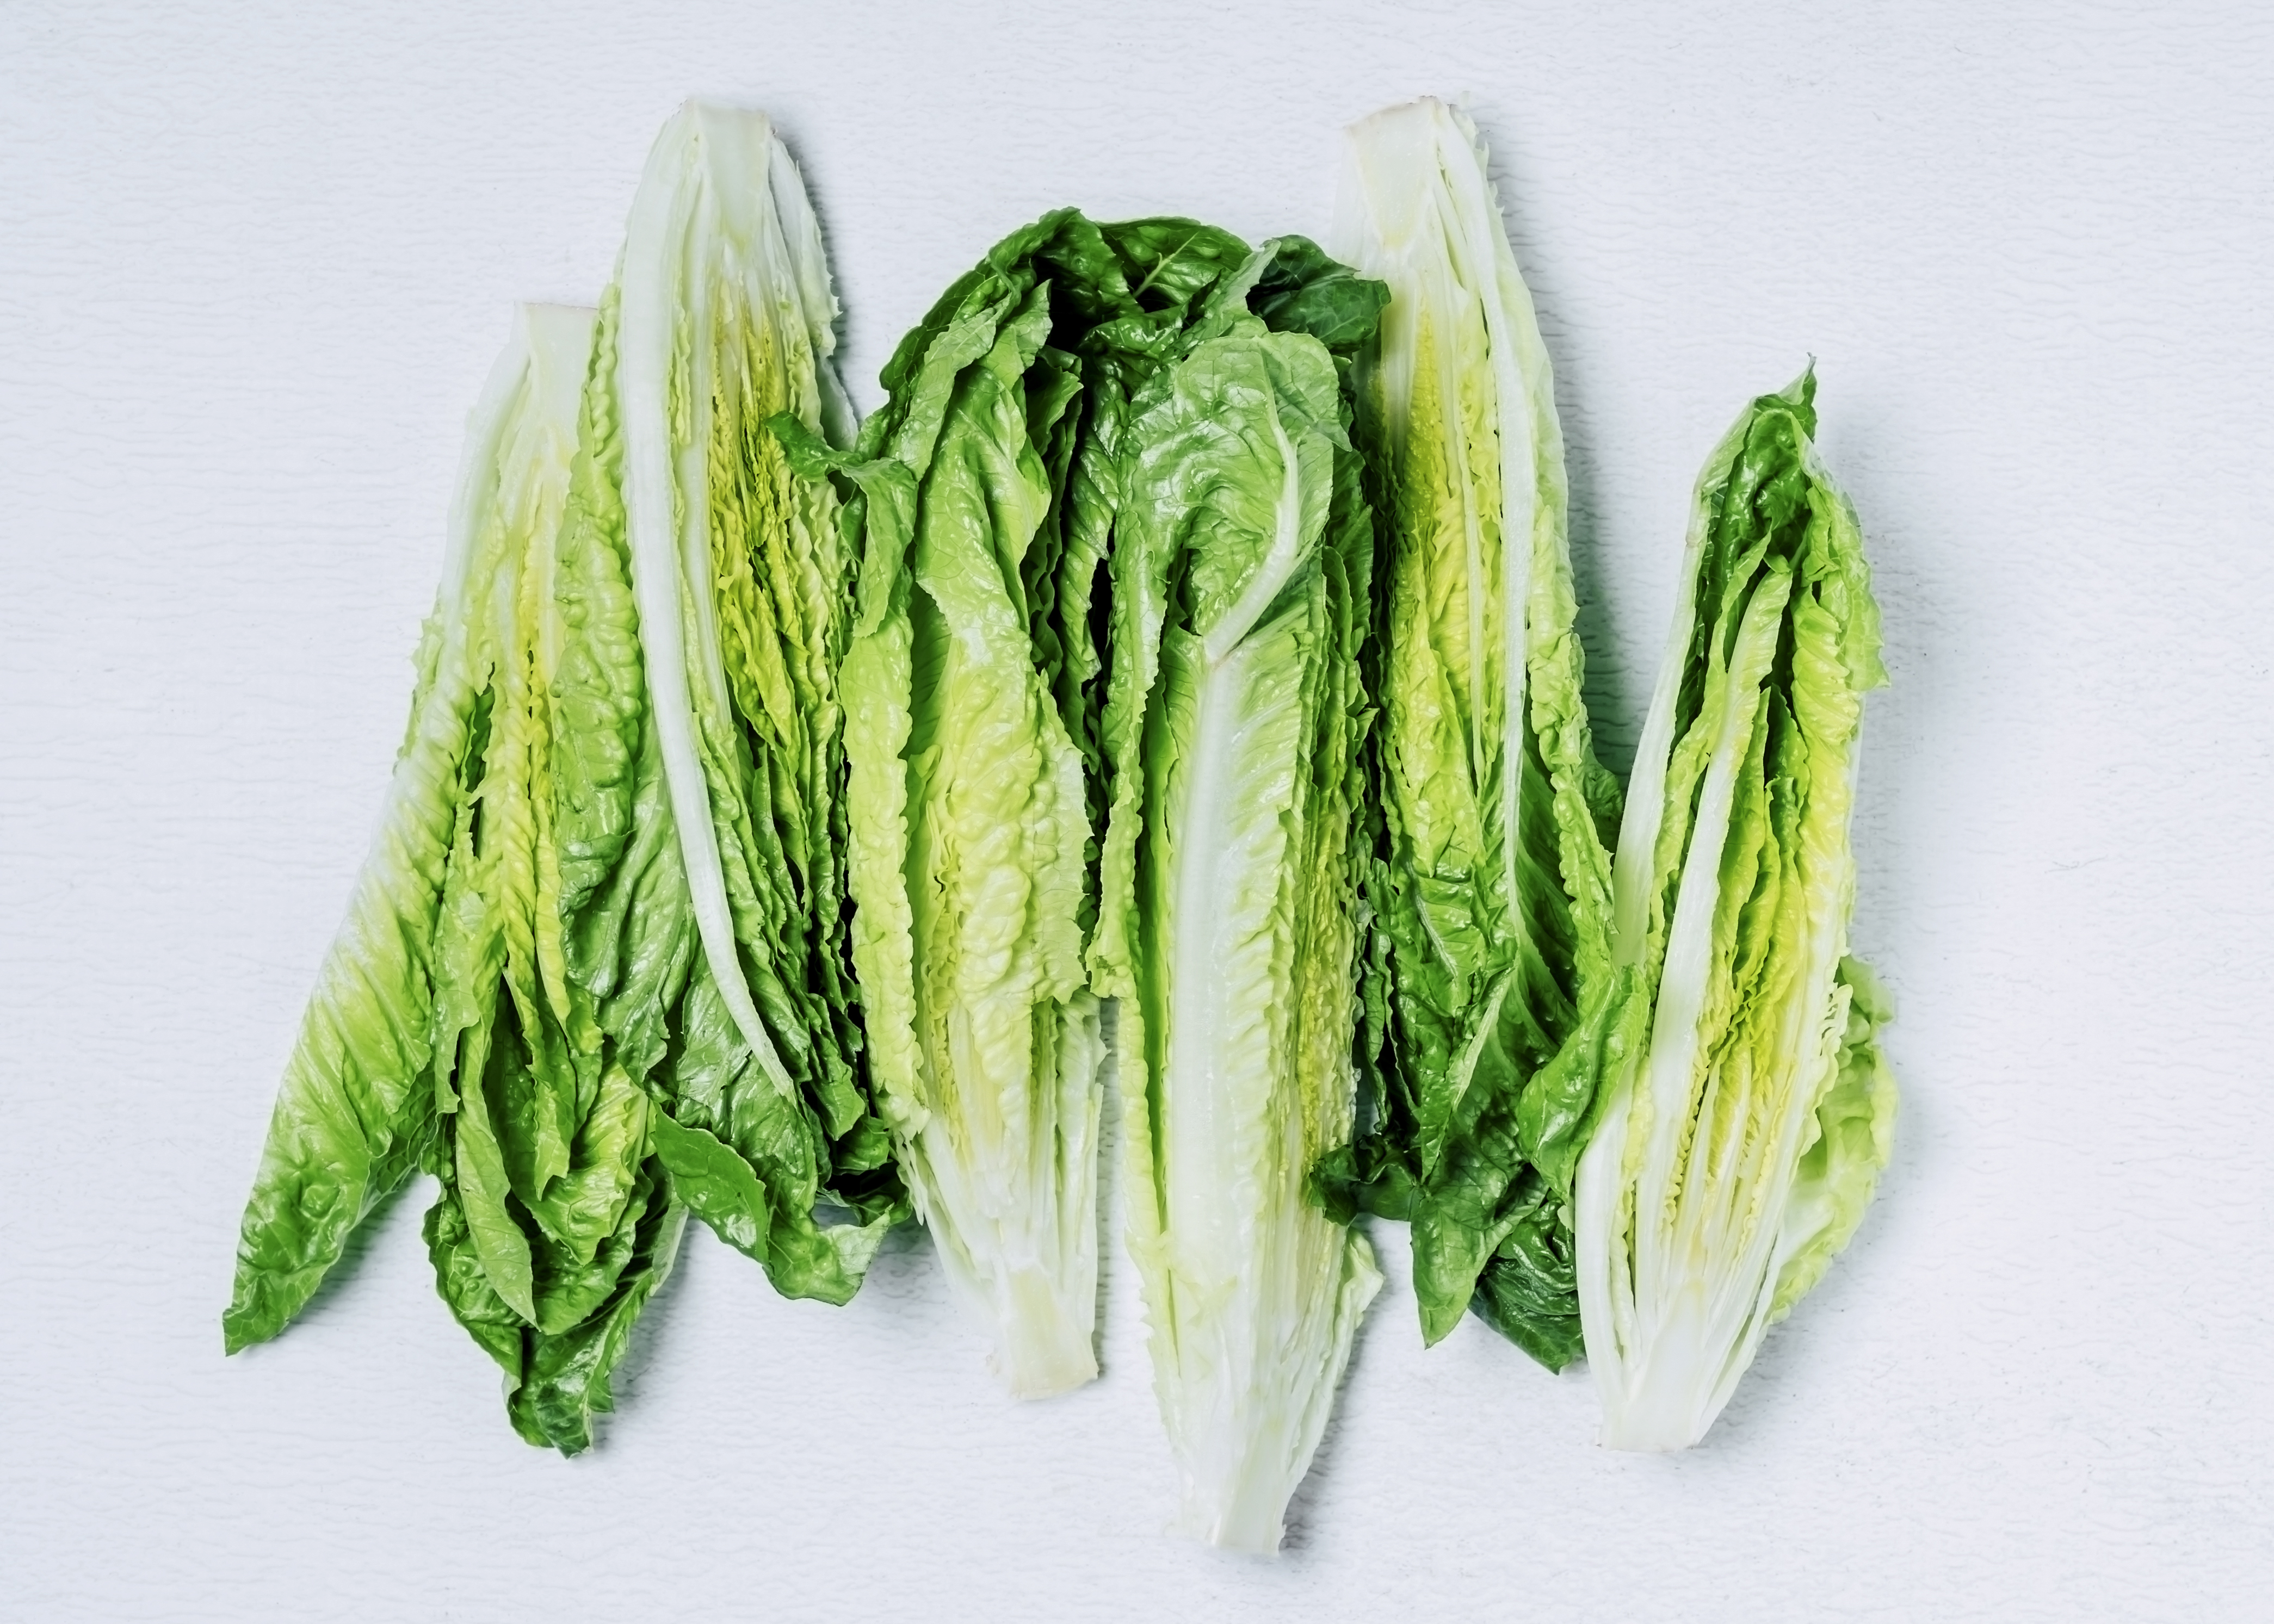 Stop Eating All Romaine Lettuce for Now, Consumer Reports Warns